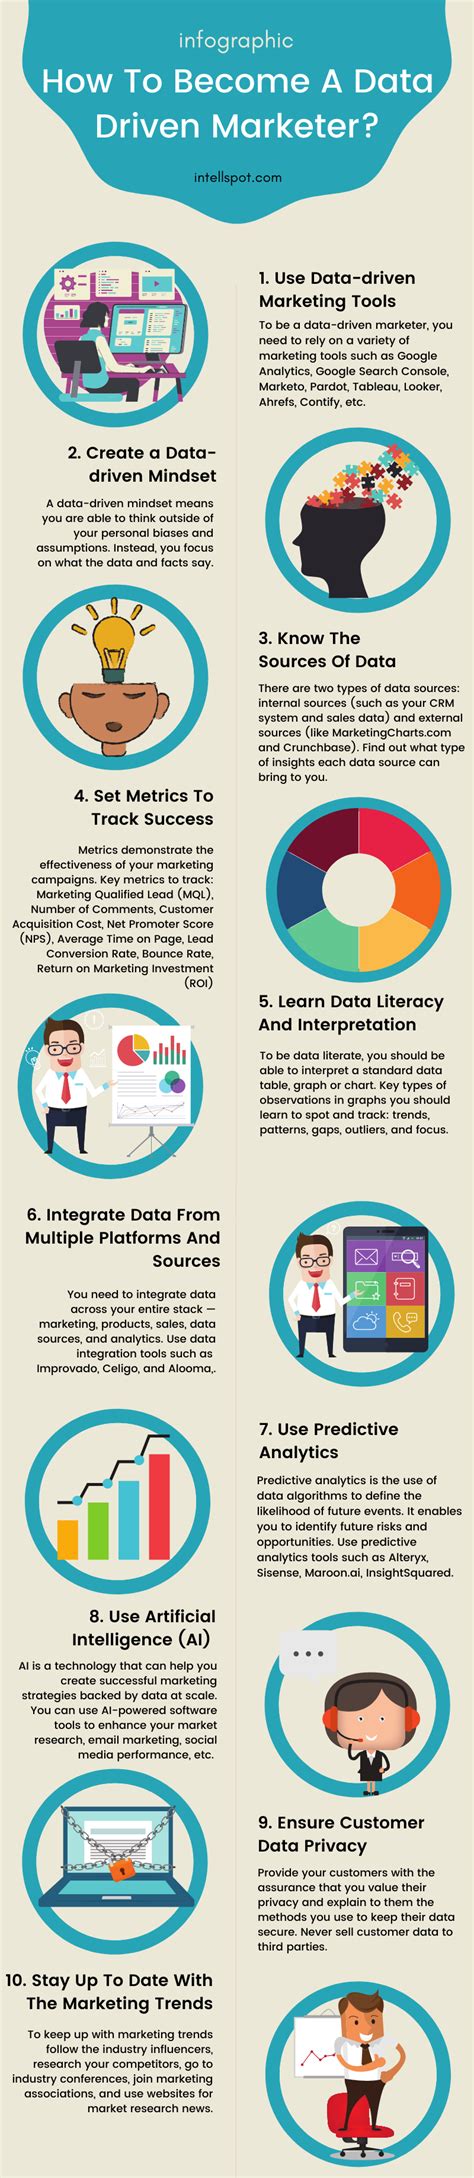 How To Become A Data Driven Marketer Infographic In 2020 Data Driven